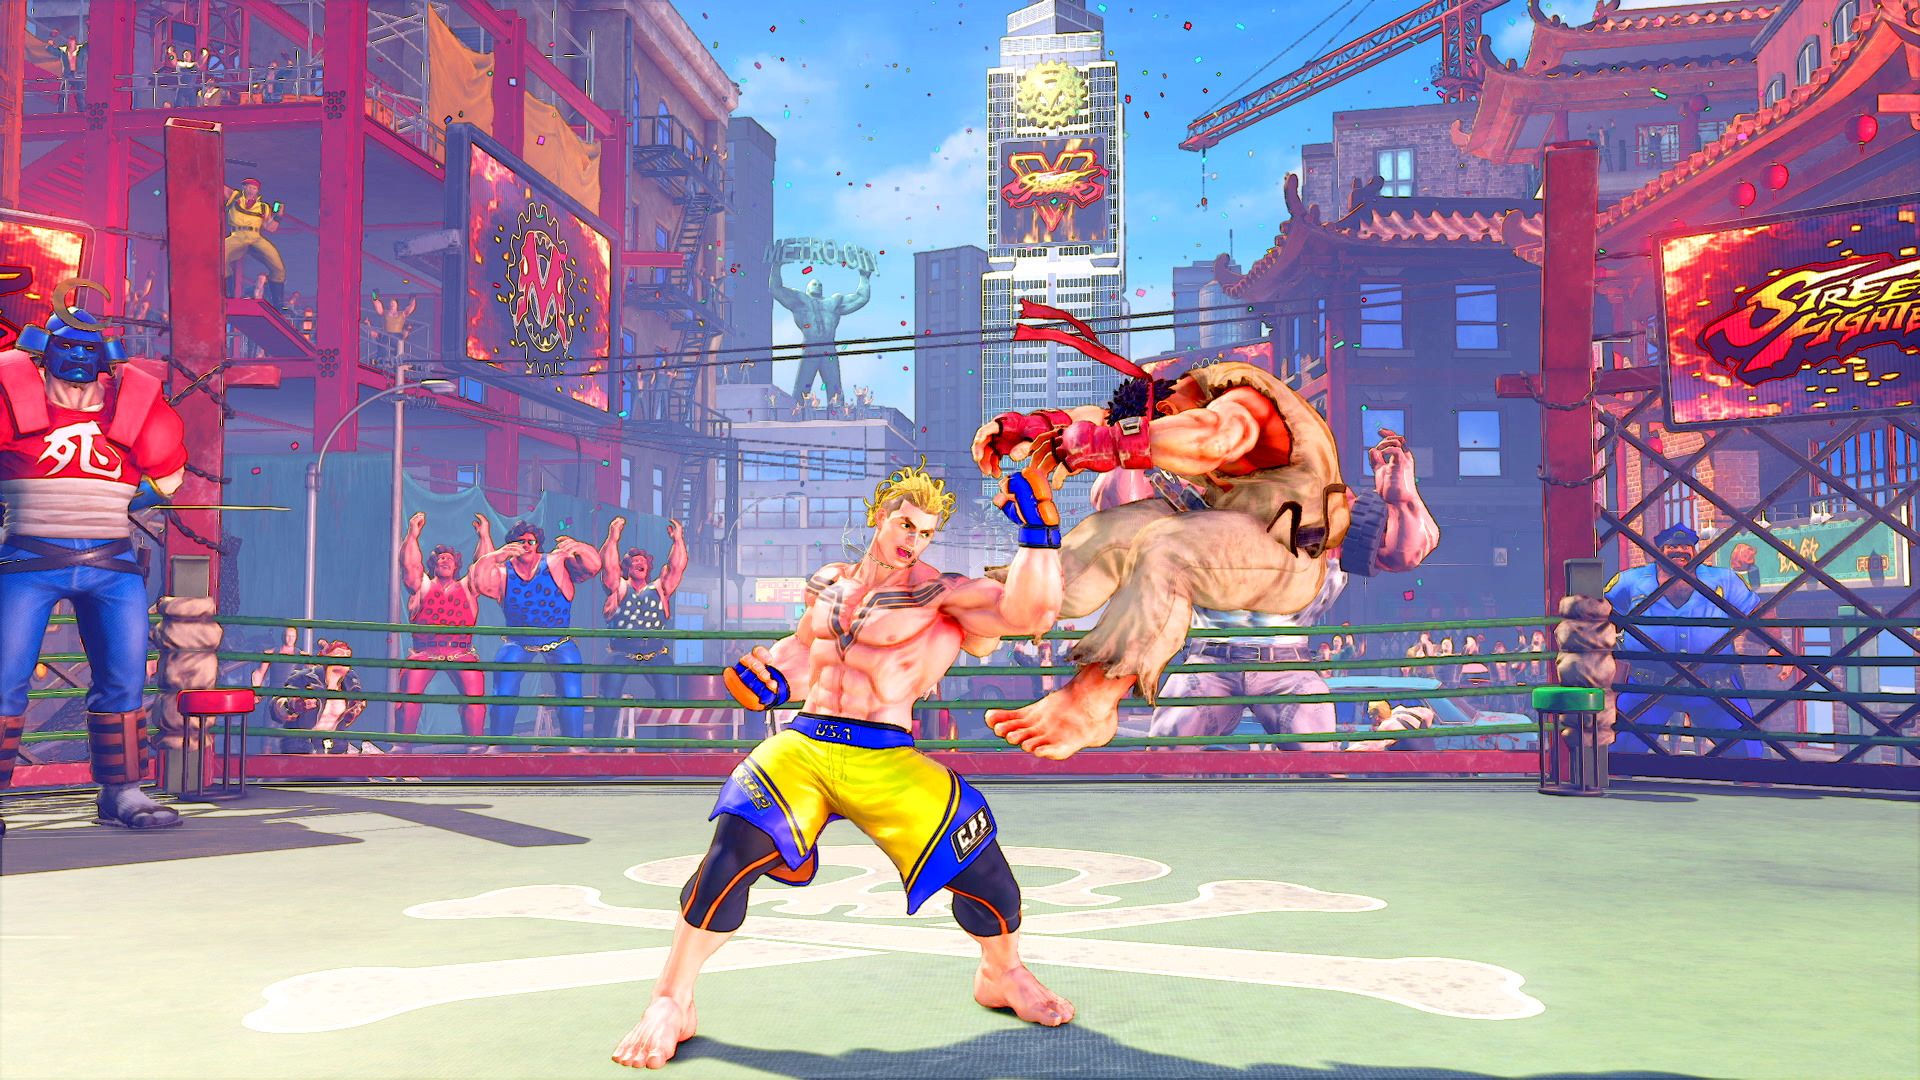 PS4: Street Fighter 6 - LAWGAMERS